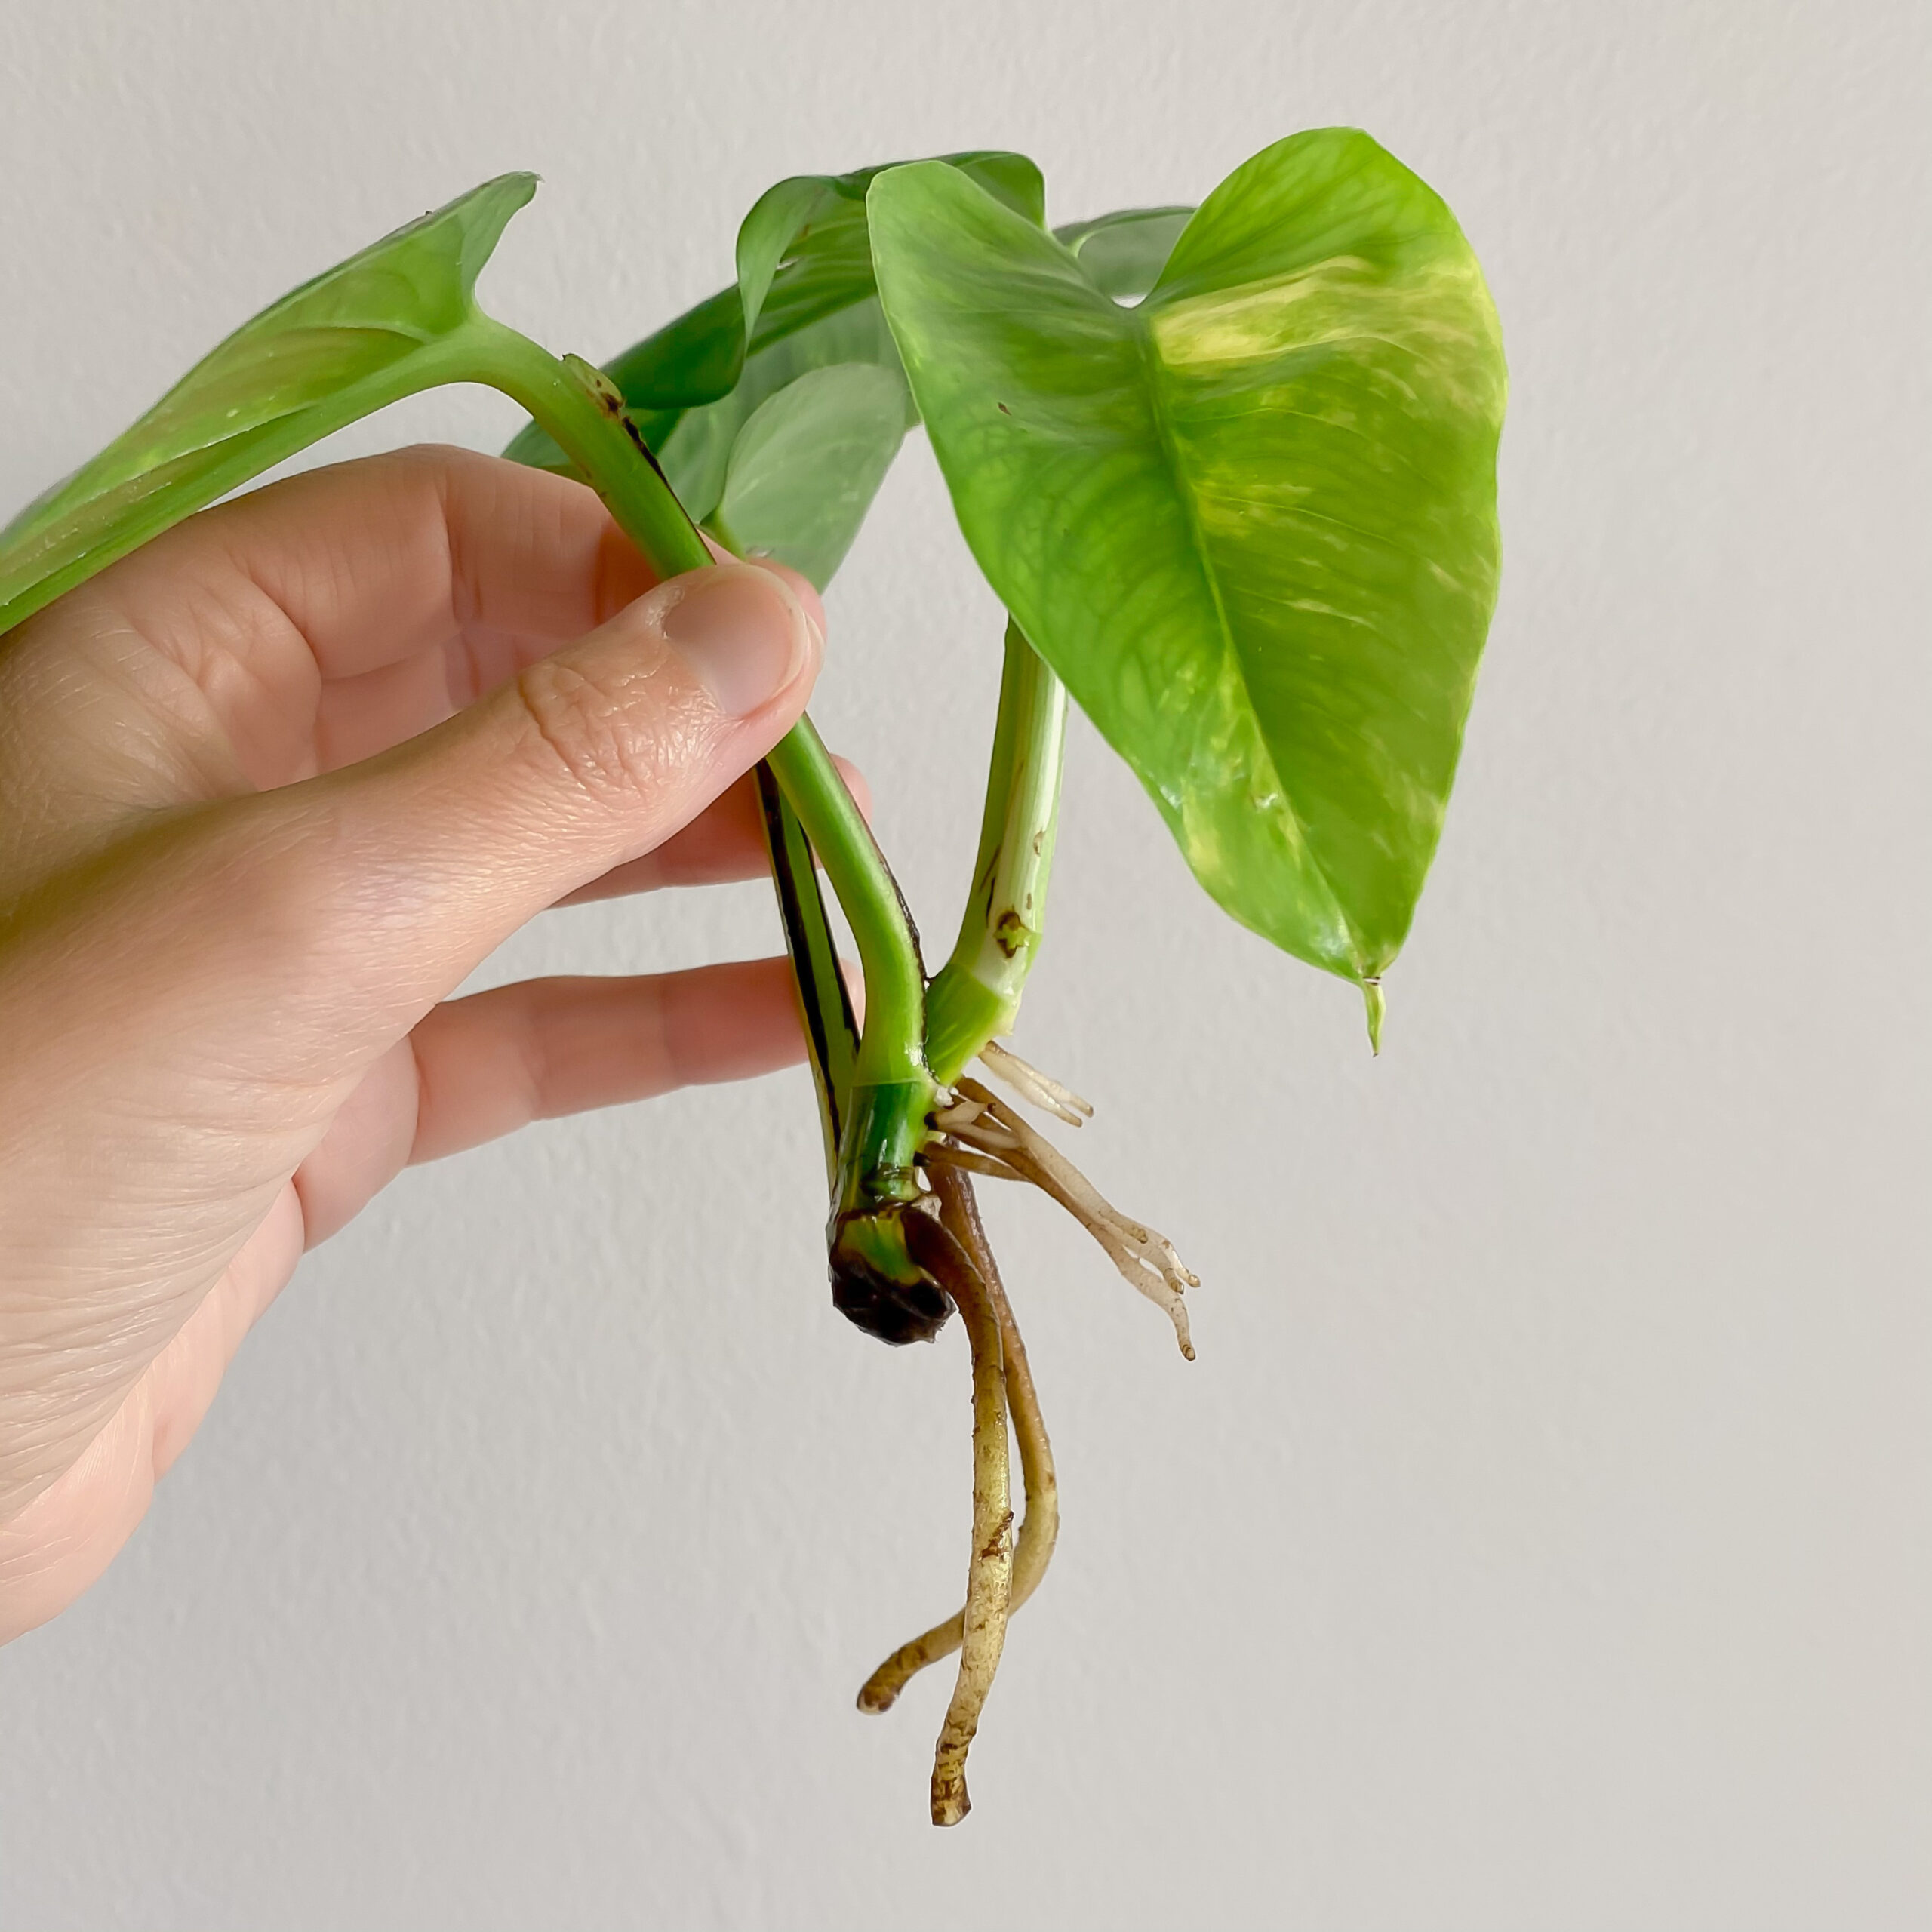 Pothos roots propagated in water